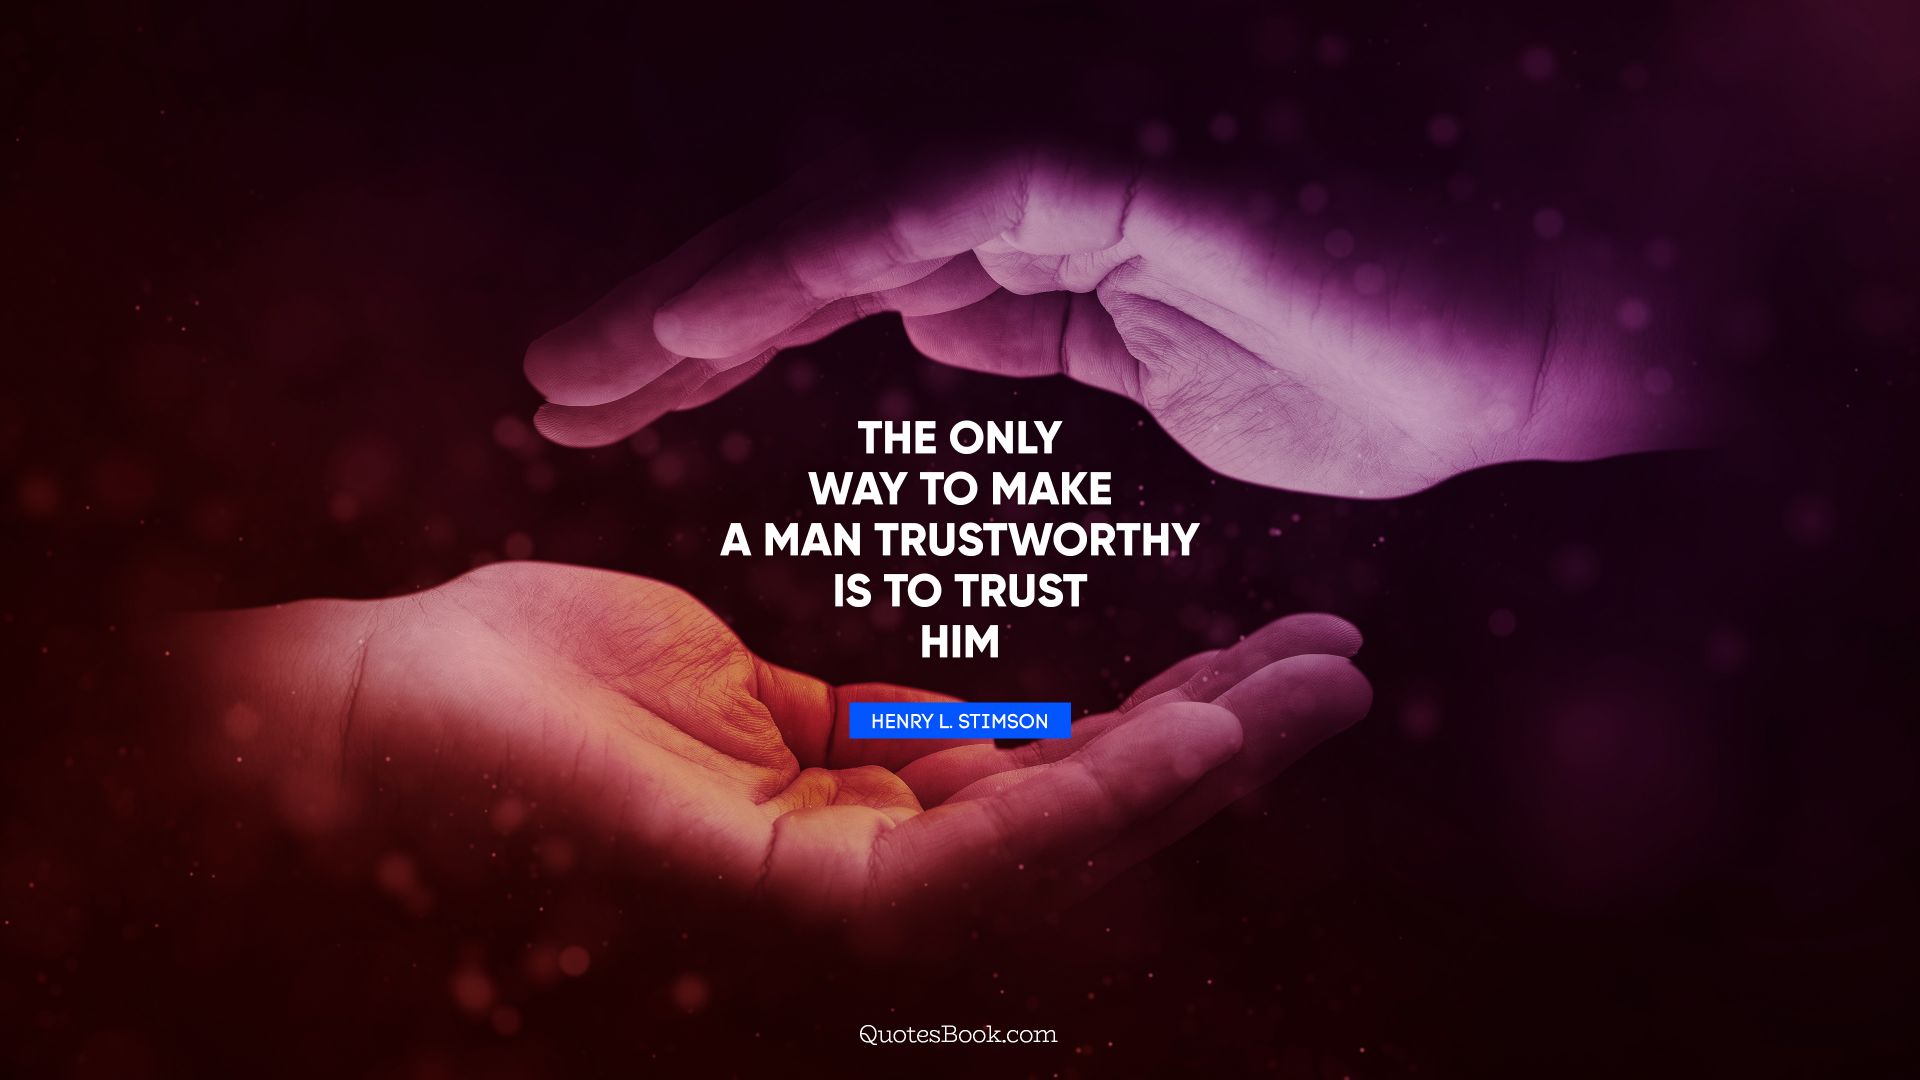 The only way to make a man trustworthy is to trust him. - Quote by Henry L. Stimson